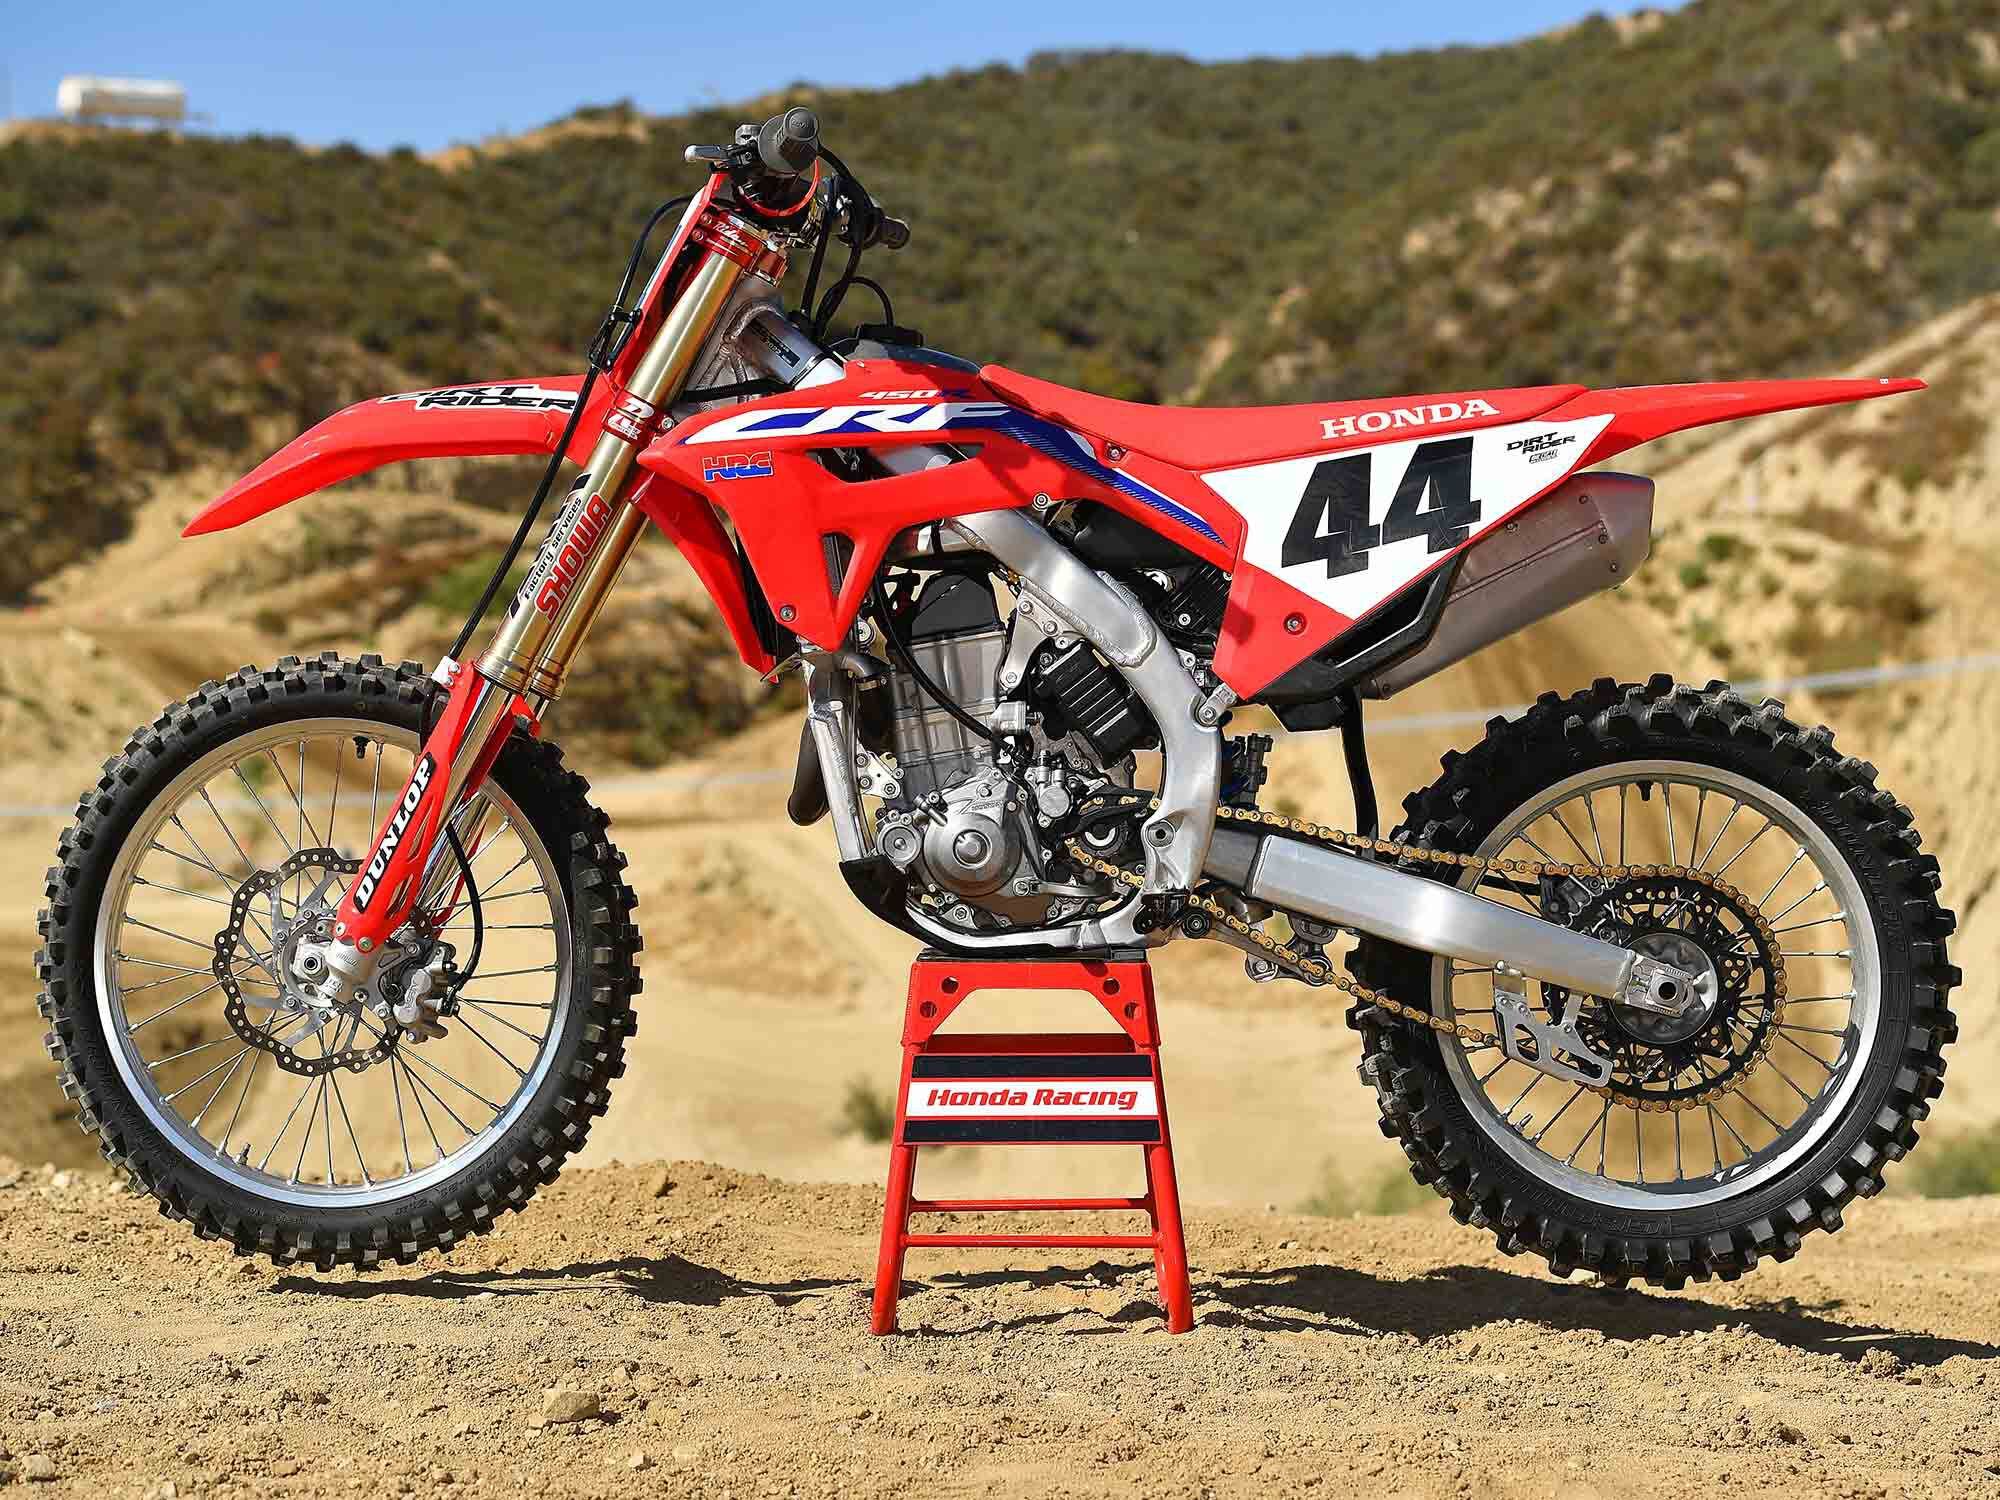 Test rider Casey Casper kept frugality in mind when making modifications to <i>Dirt Rider</i>’s 2022 Honda CRF450R Long Haul project. Nothing was installed that wouldn’t go on his personal bike.